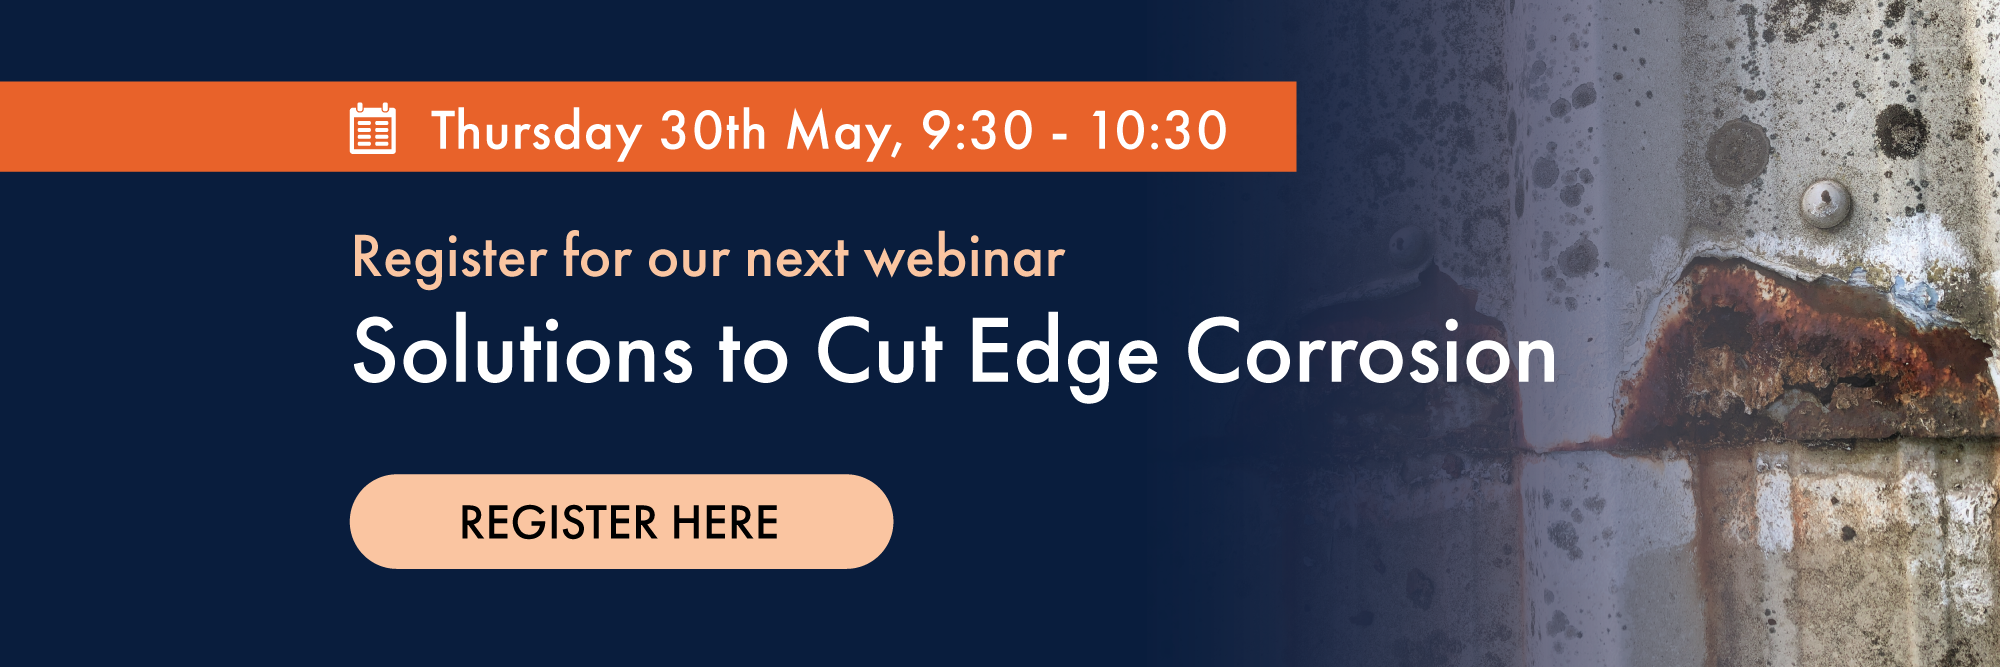 Banner with the text "Register for our next webinar Solutions to Cut Edge Corrosion"